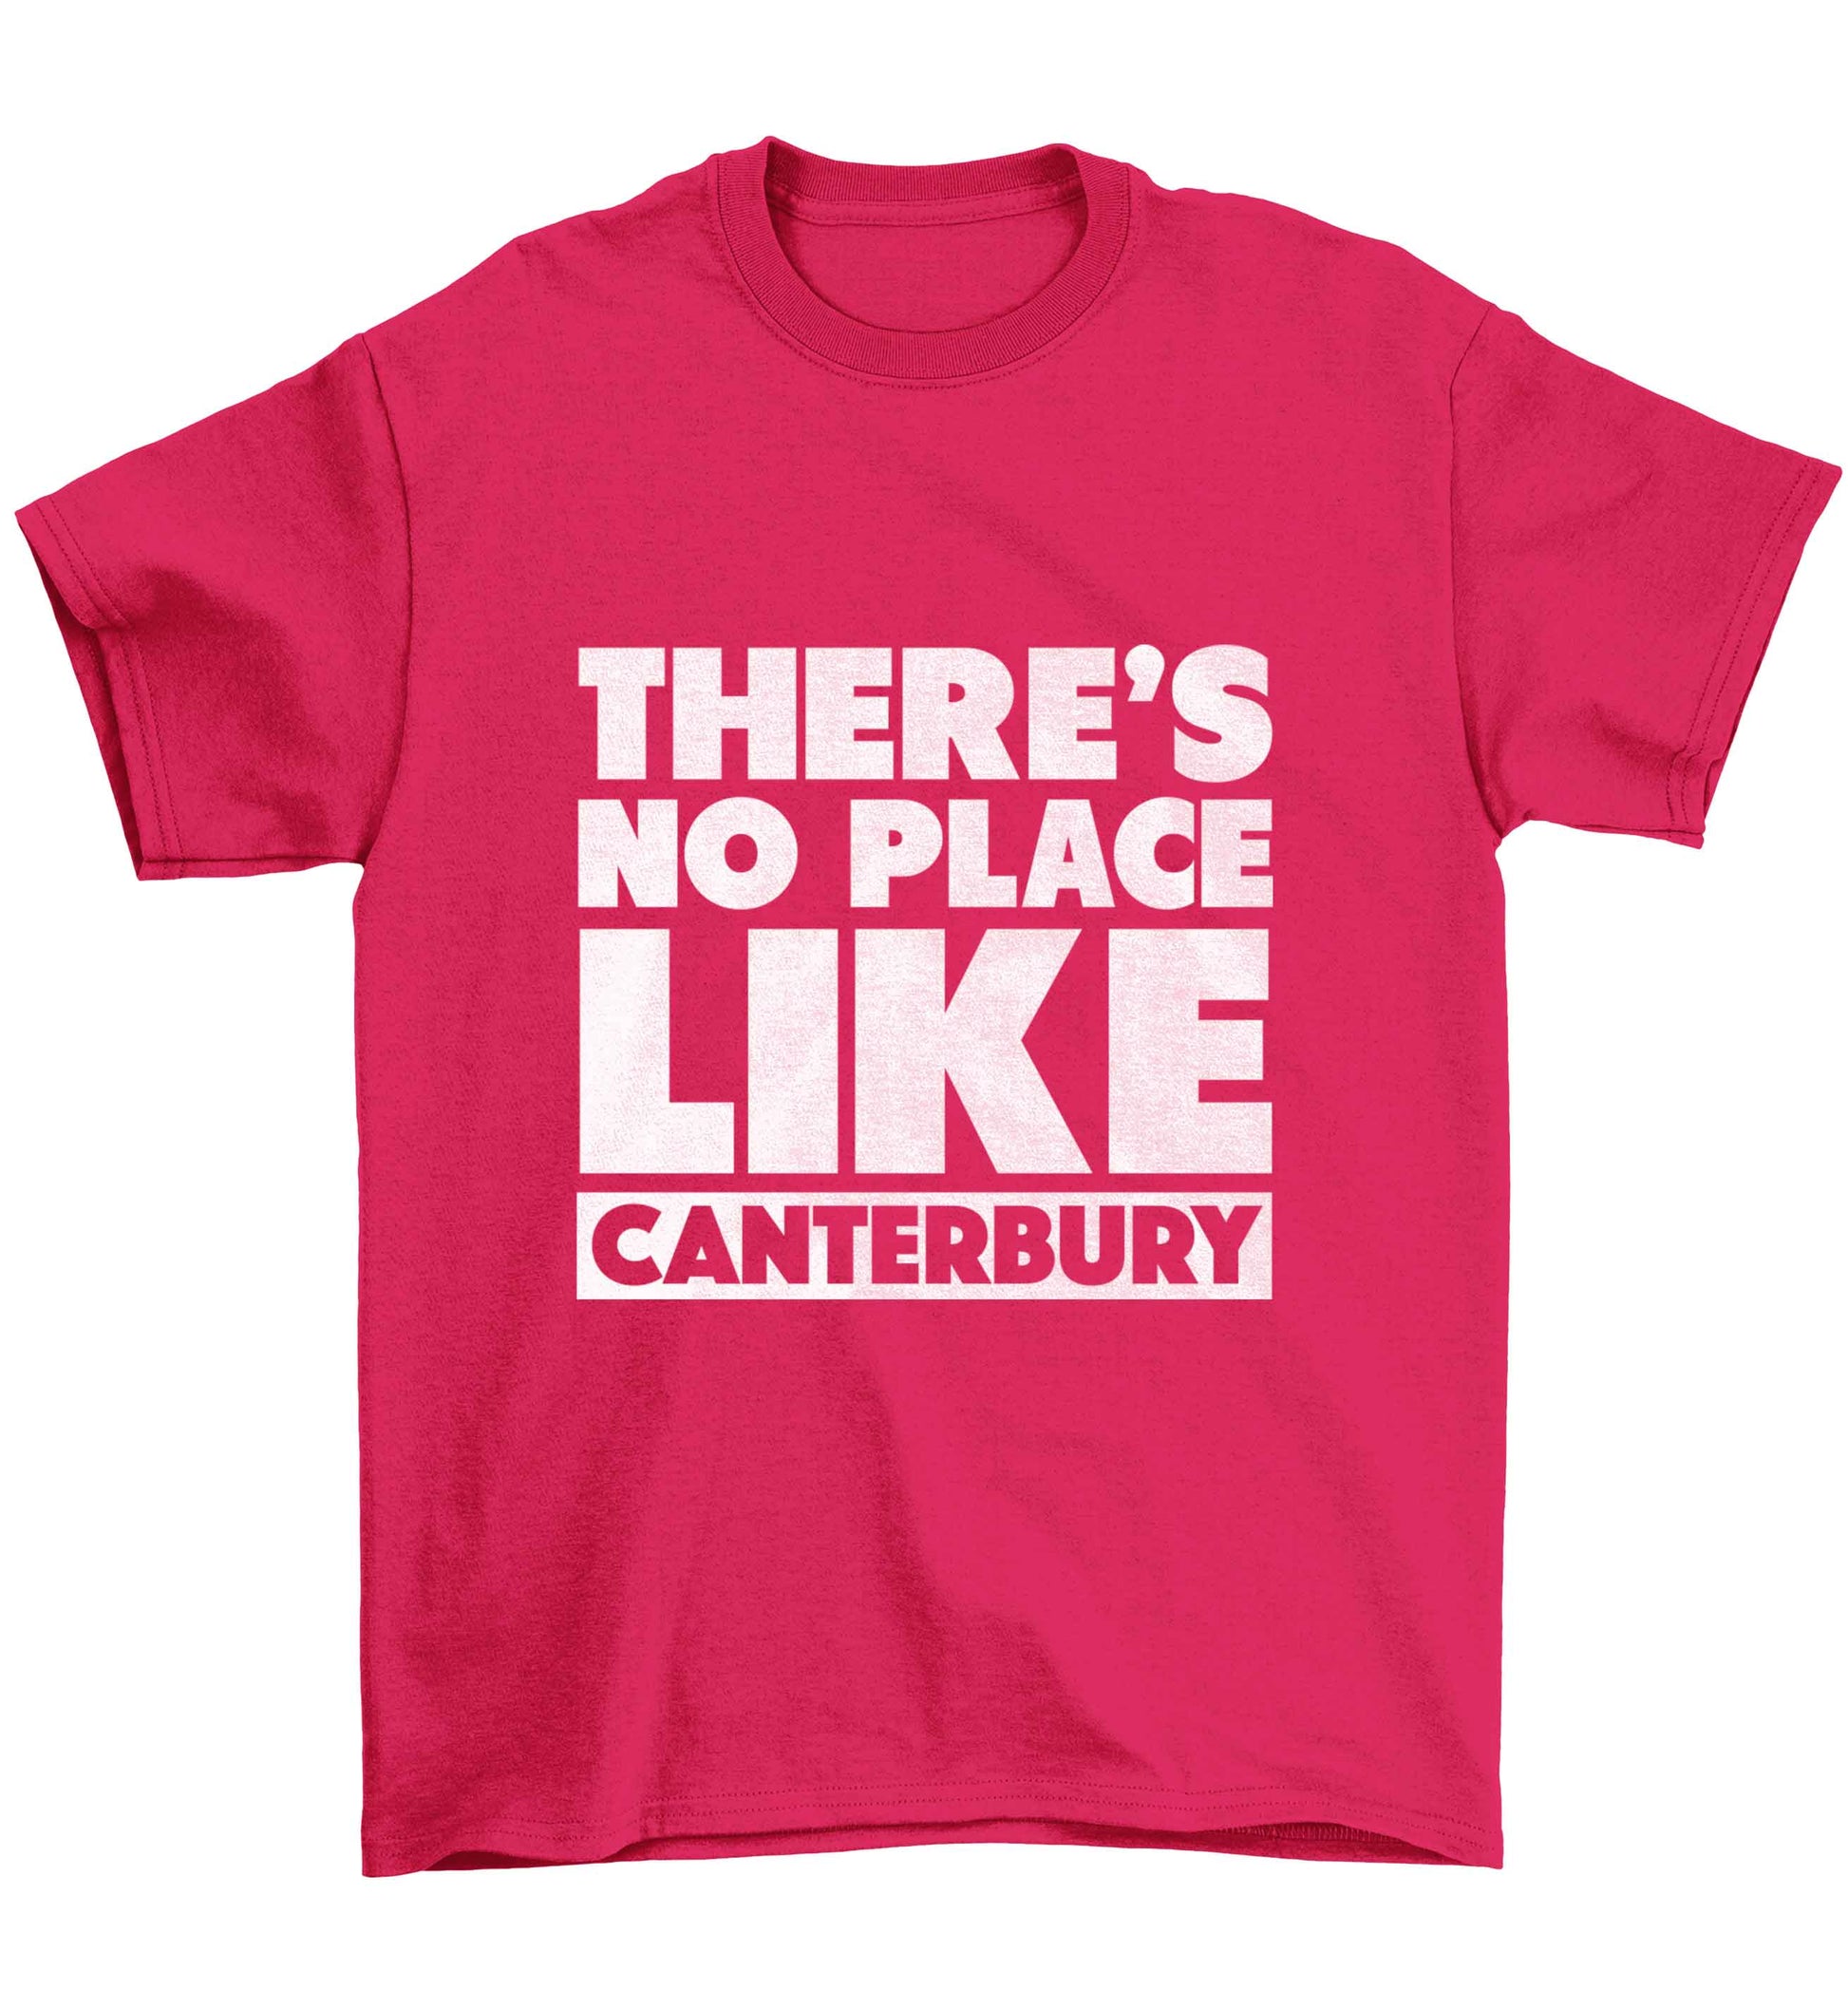 There's no place like Canterbury Children's pink Tshirt 12-13 Years